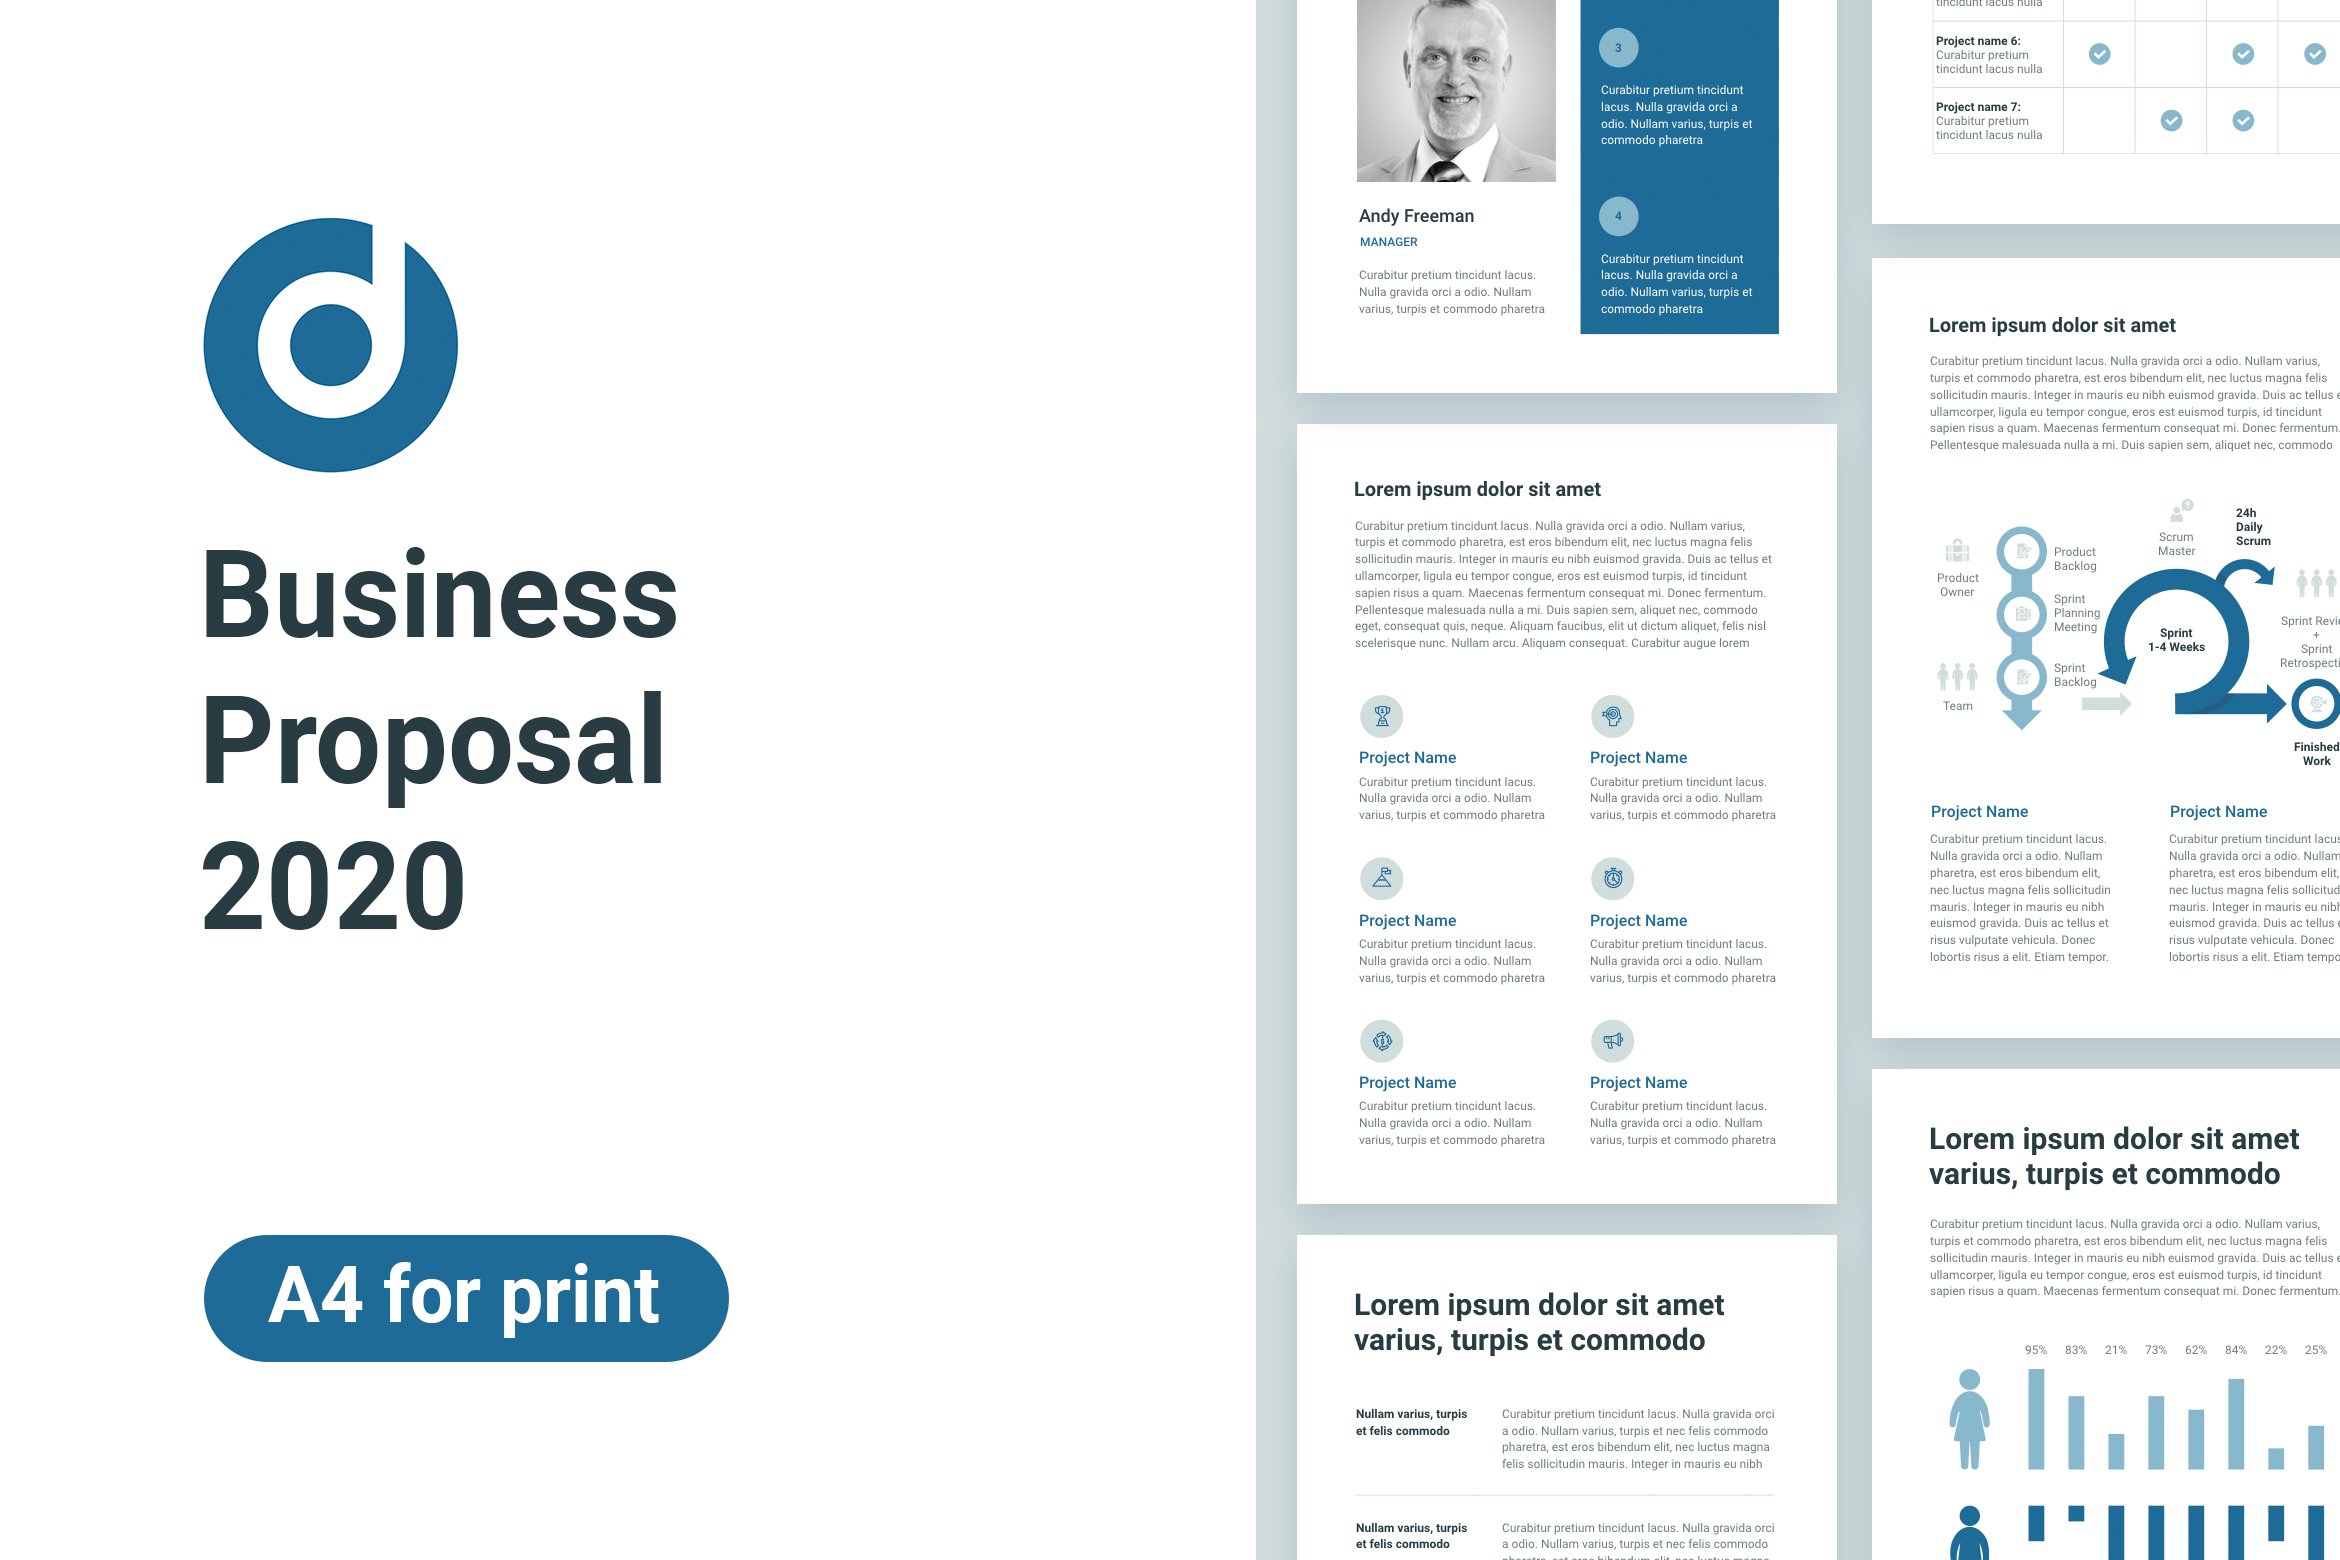 Business Proposal A4 PowerPoint cover image.